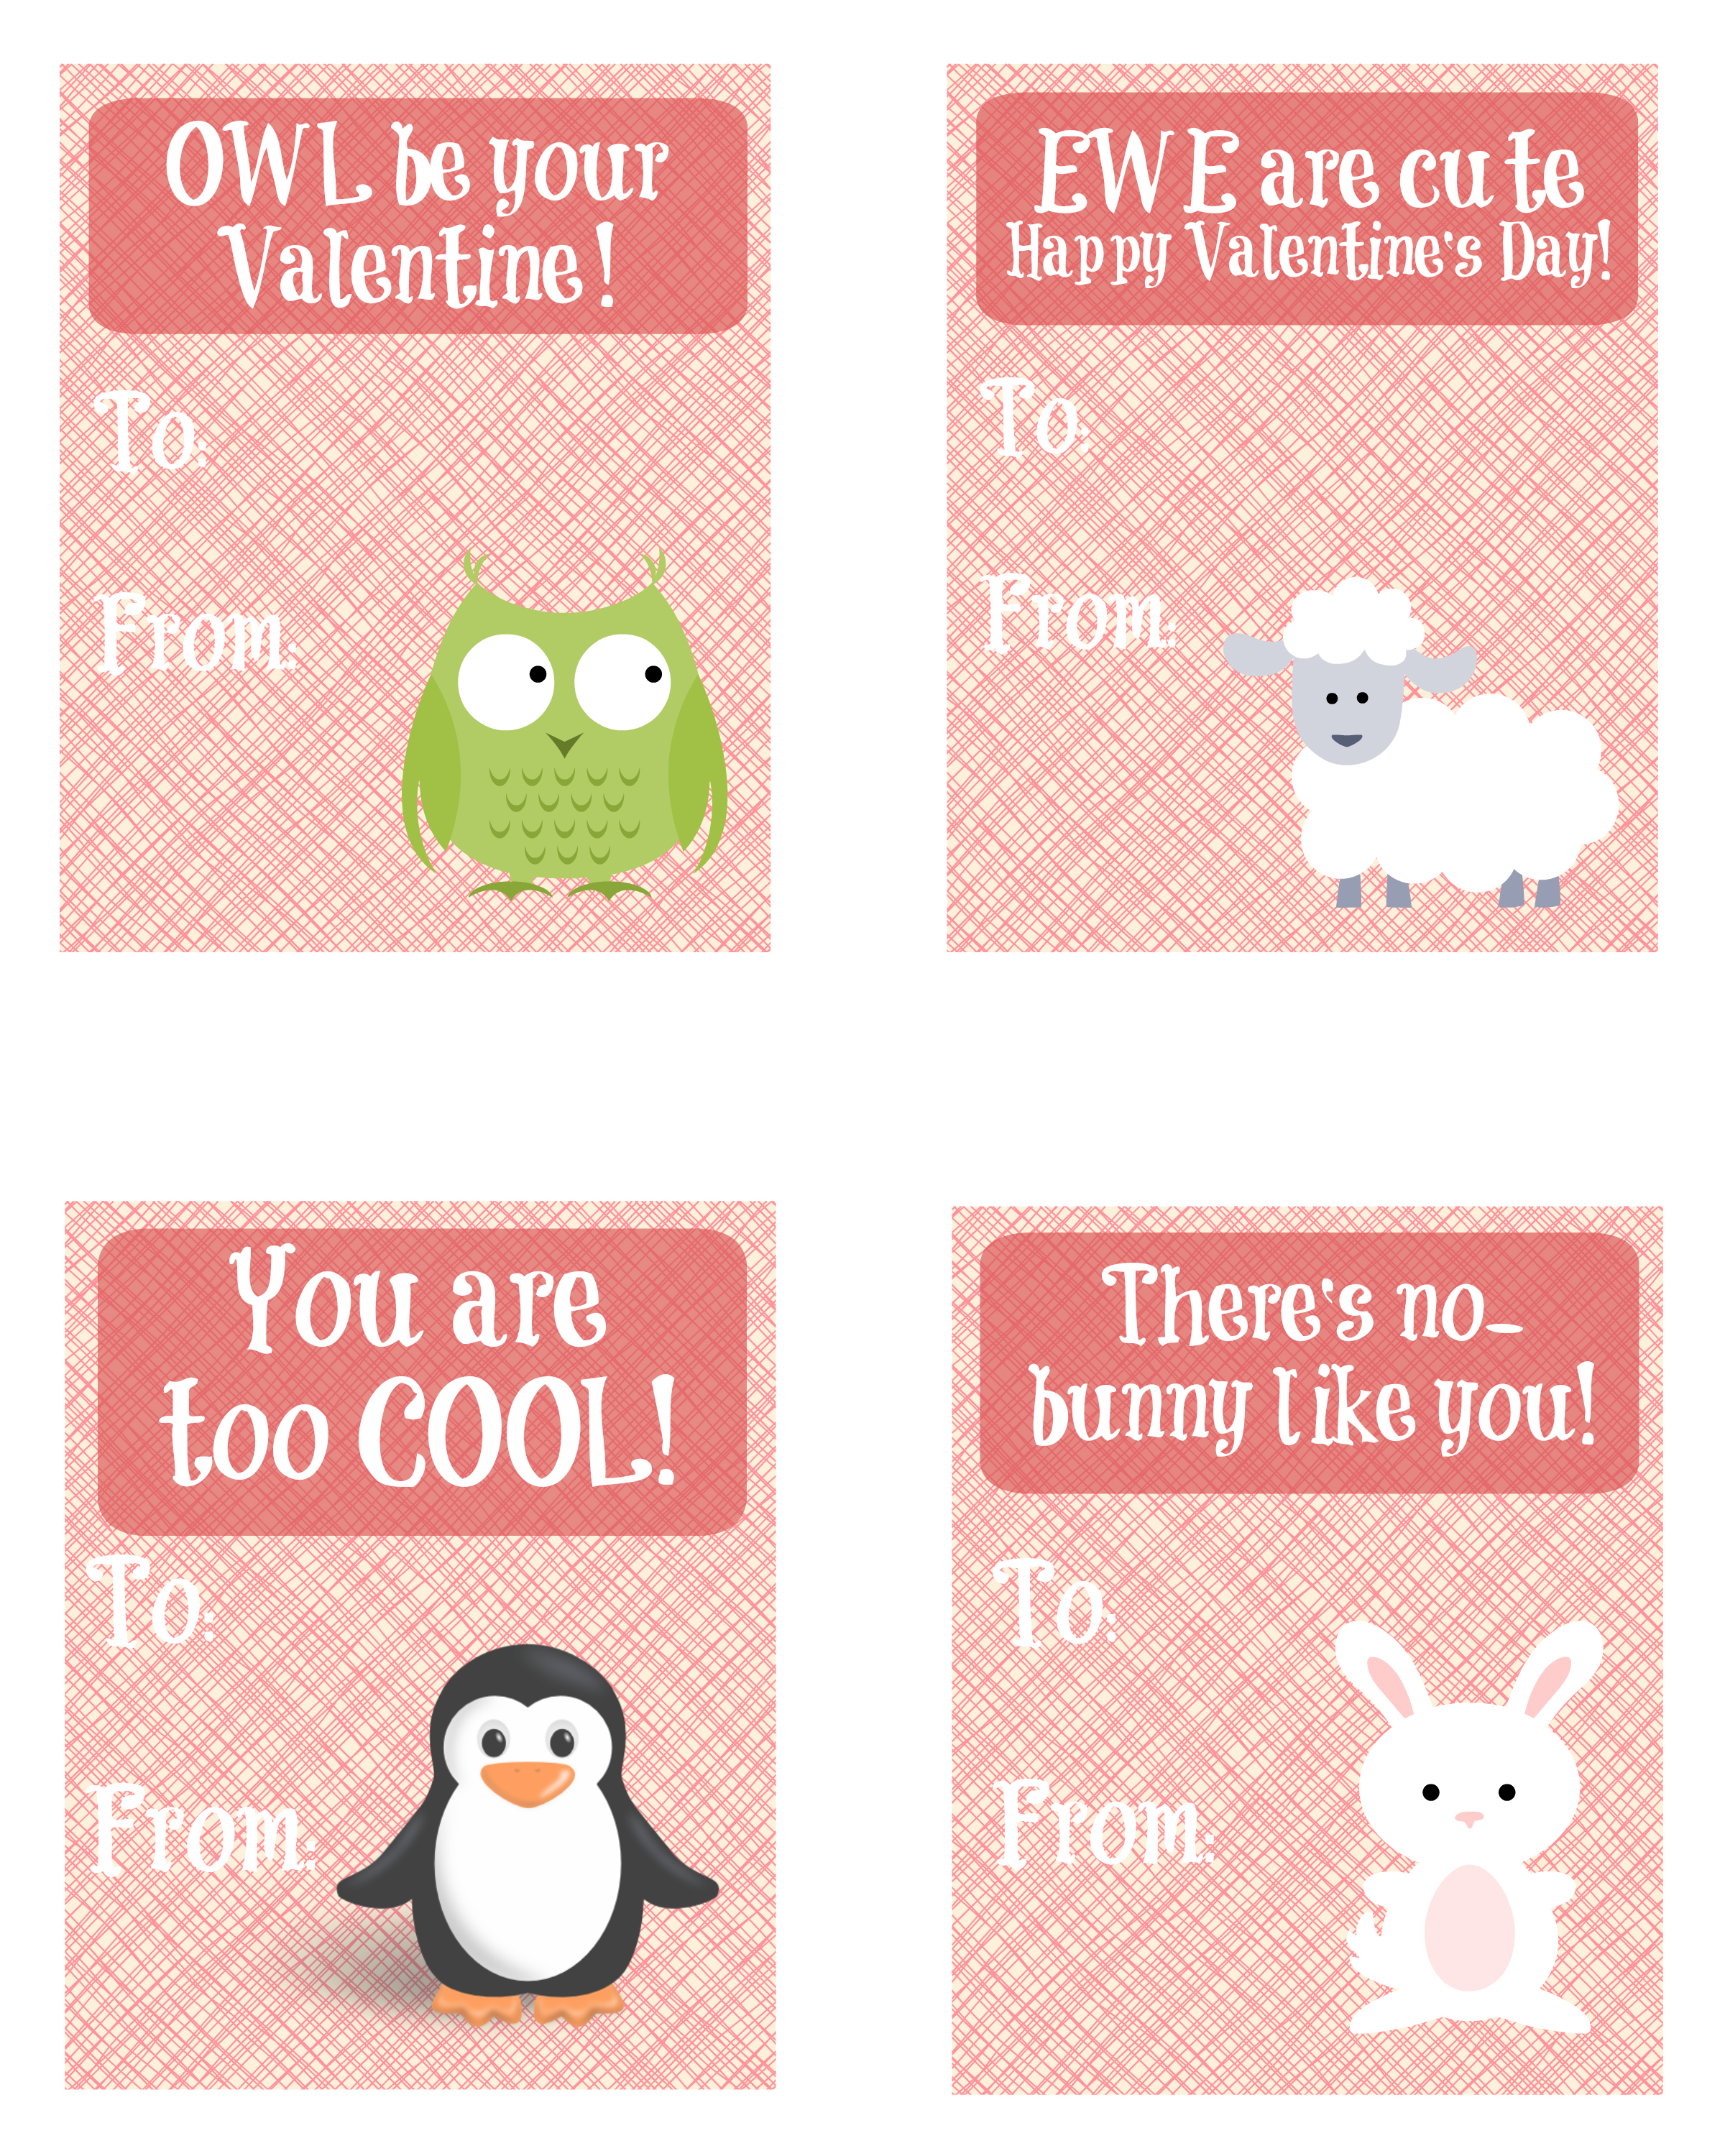 free-printable-valentines-day-card-roundup-sweet-deals-4-moms